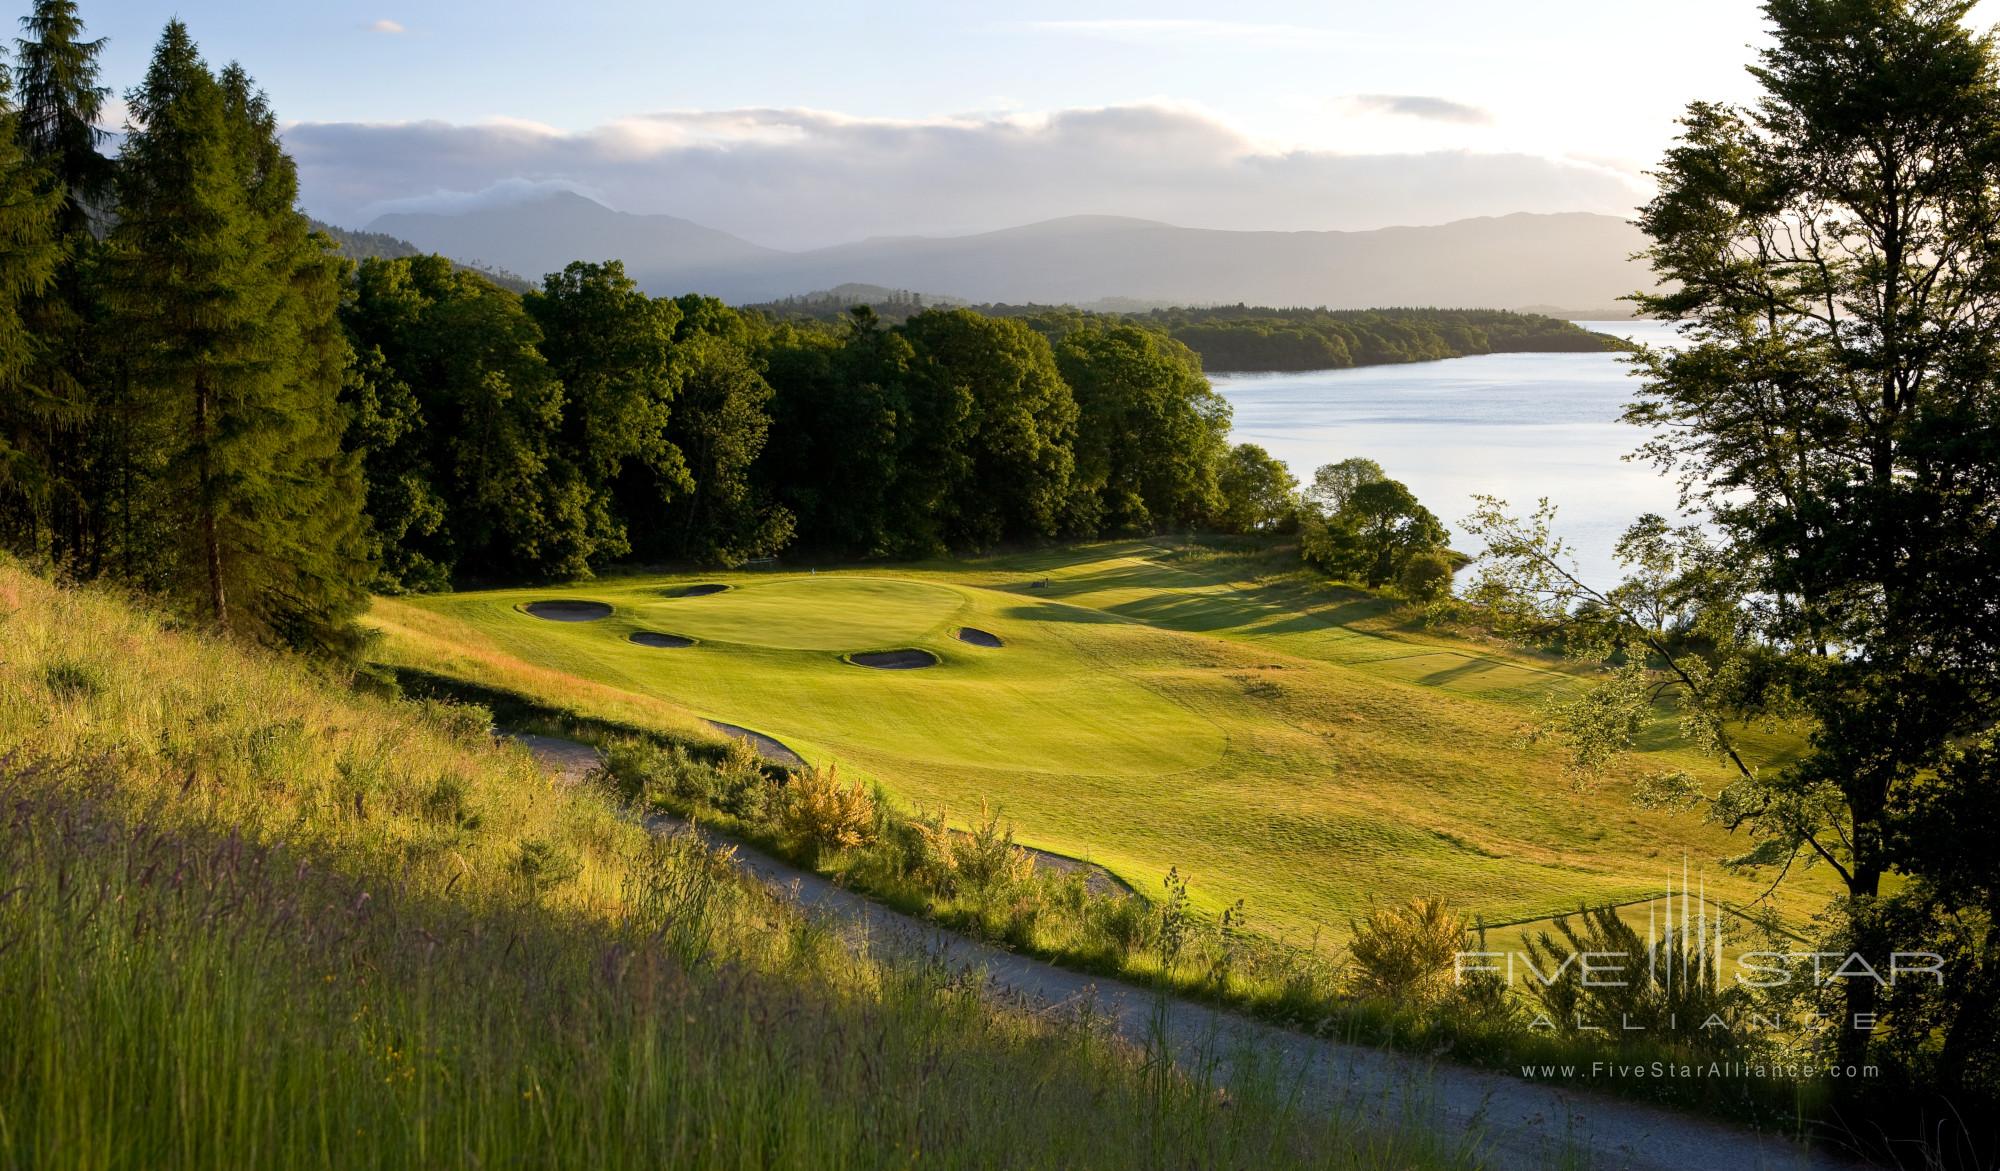 14th Hole at Cameron House on Loch Lomond